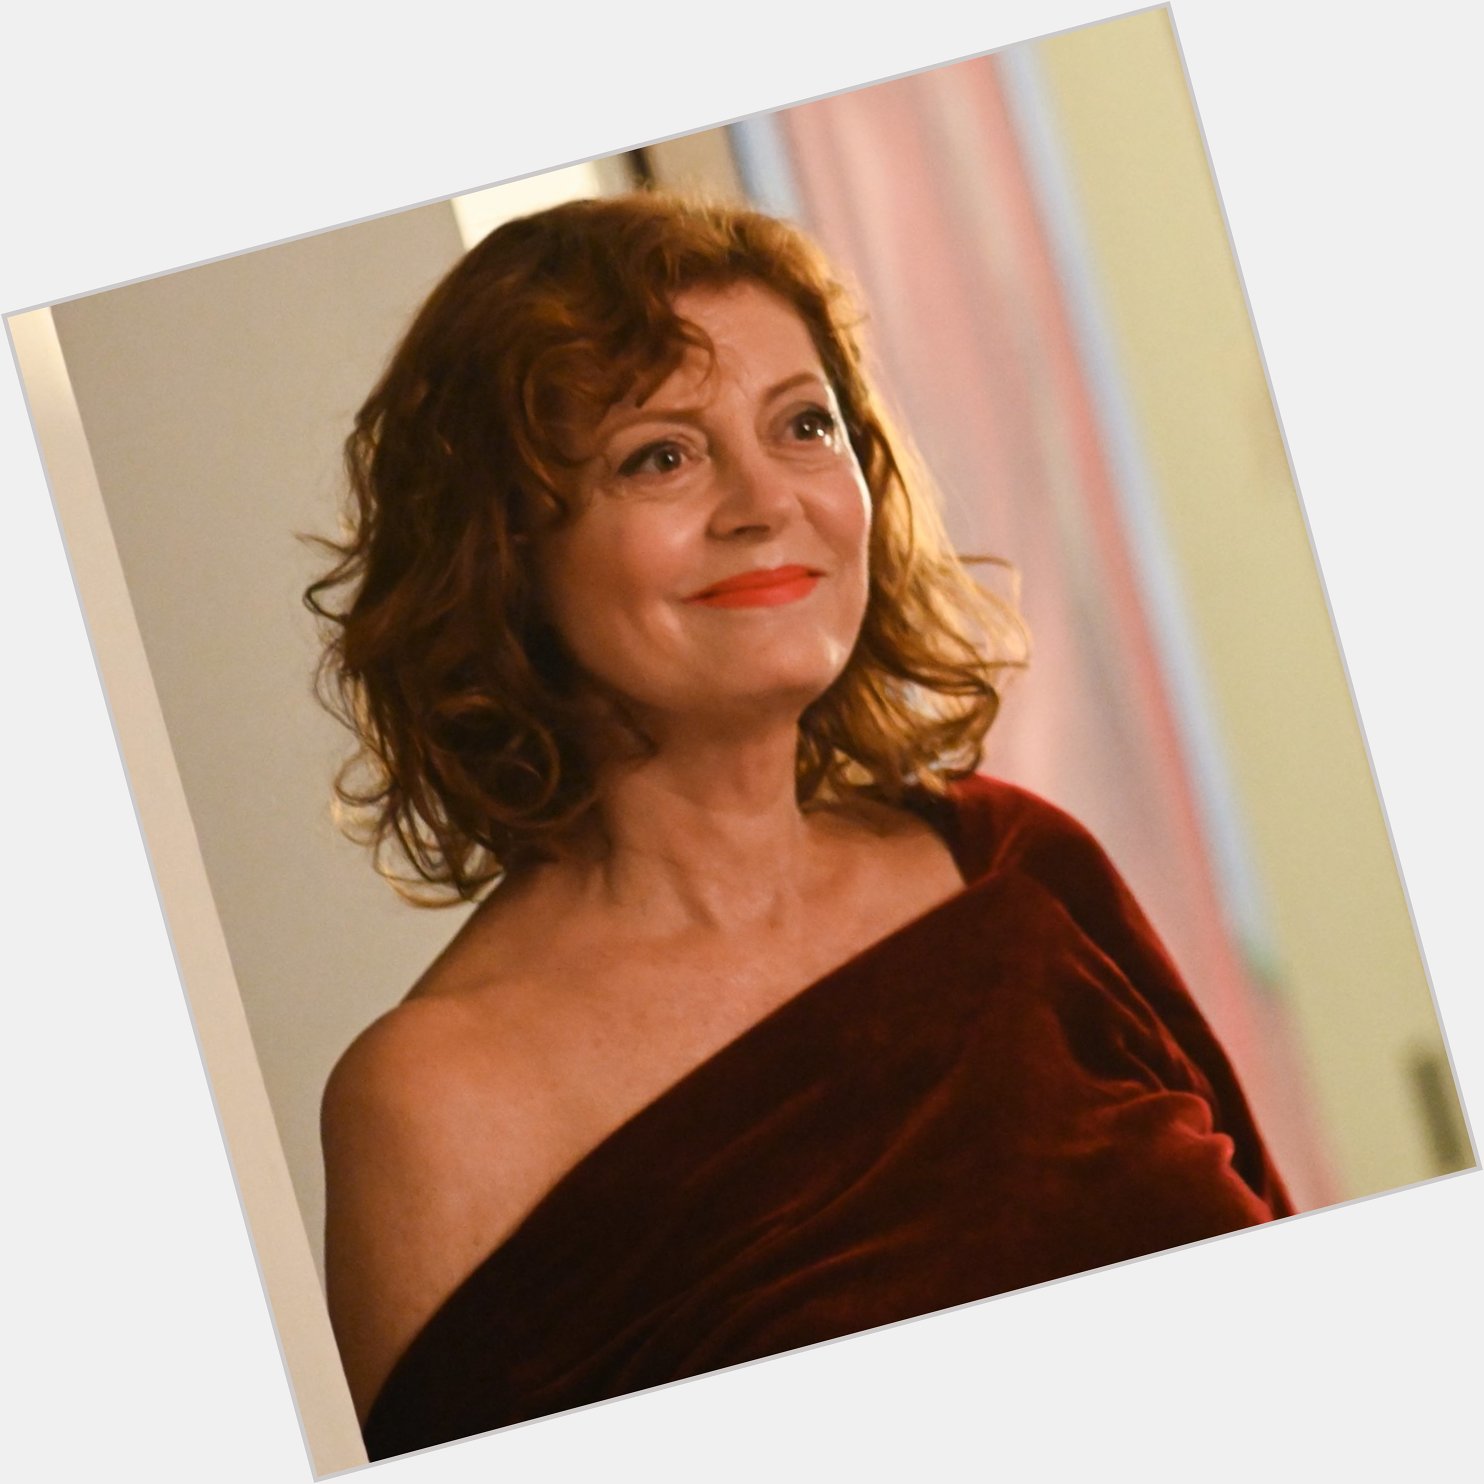 Wishing a happy birthday to the talented Susan Sarandon! We were all touched by the amazing 